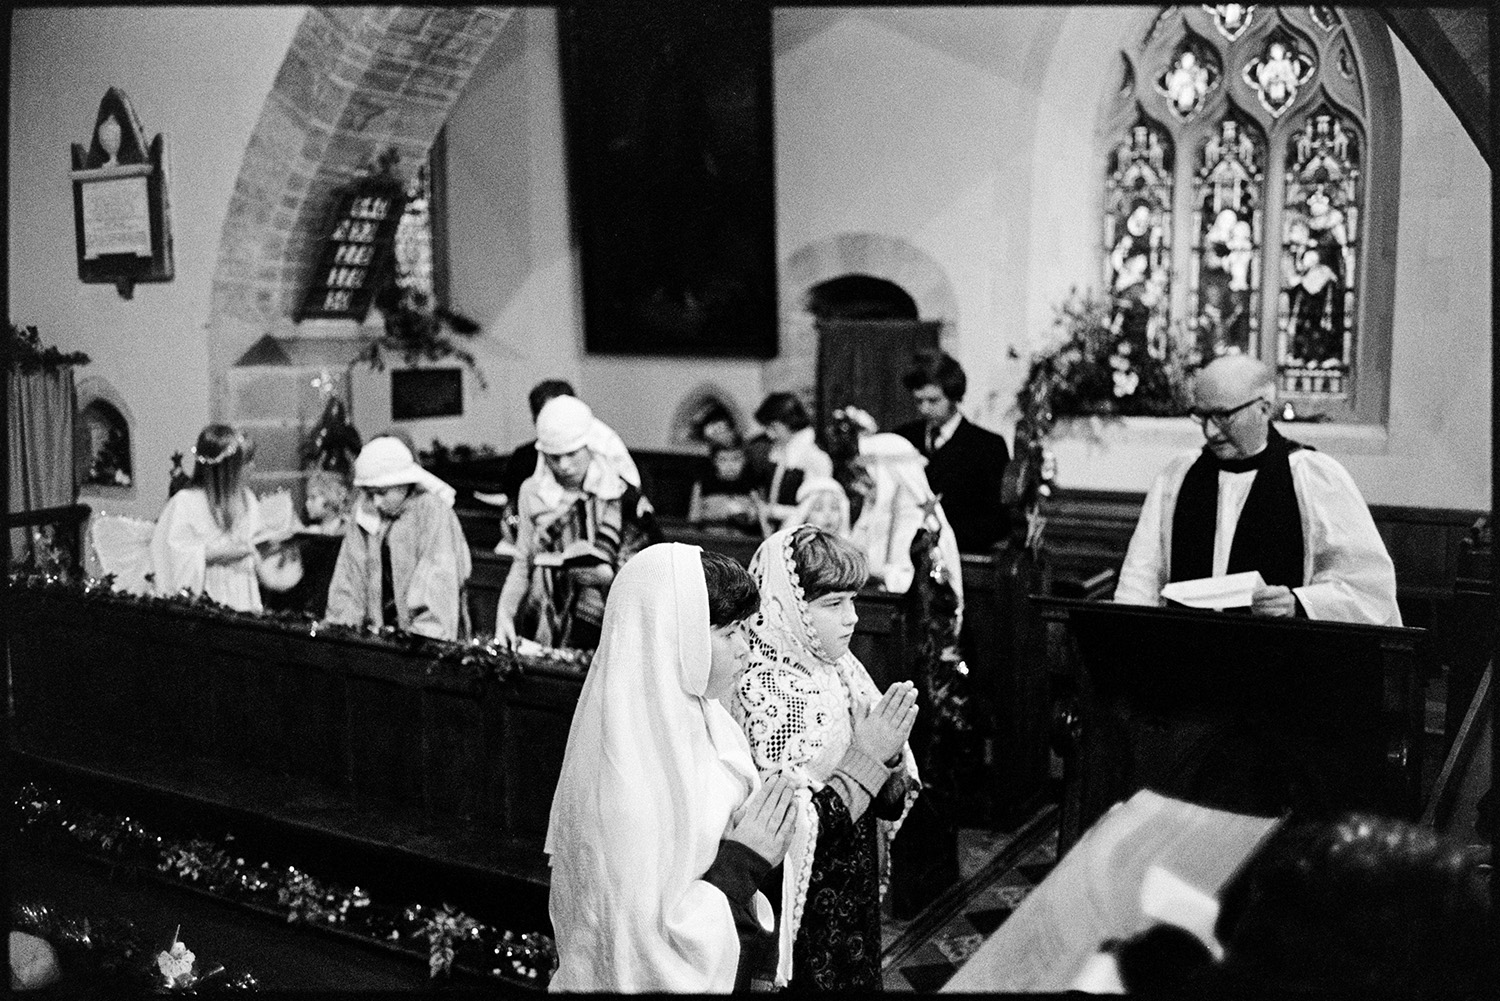 Nativity play, children in church. 
[Children performing in a nativity play at Dolton Church. Other children are dressed as angels and shepherds in the background, and are singing. The church is decorated for Christmas with tinsel.]